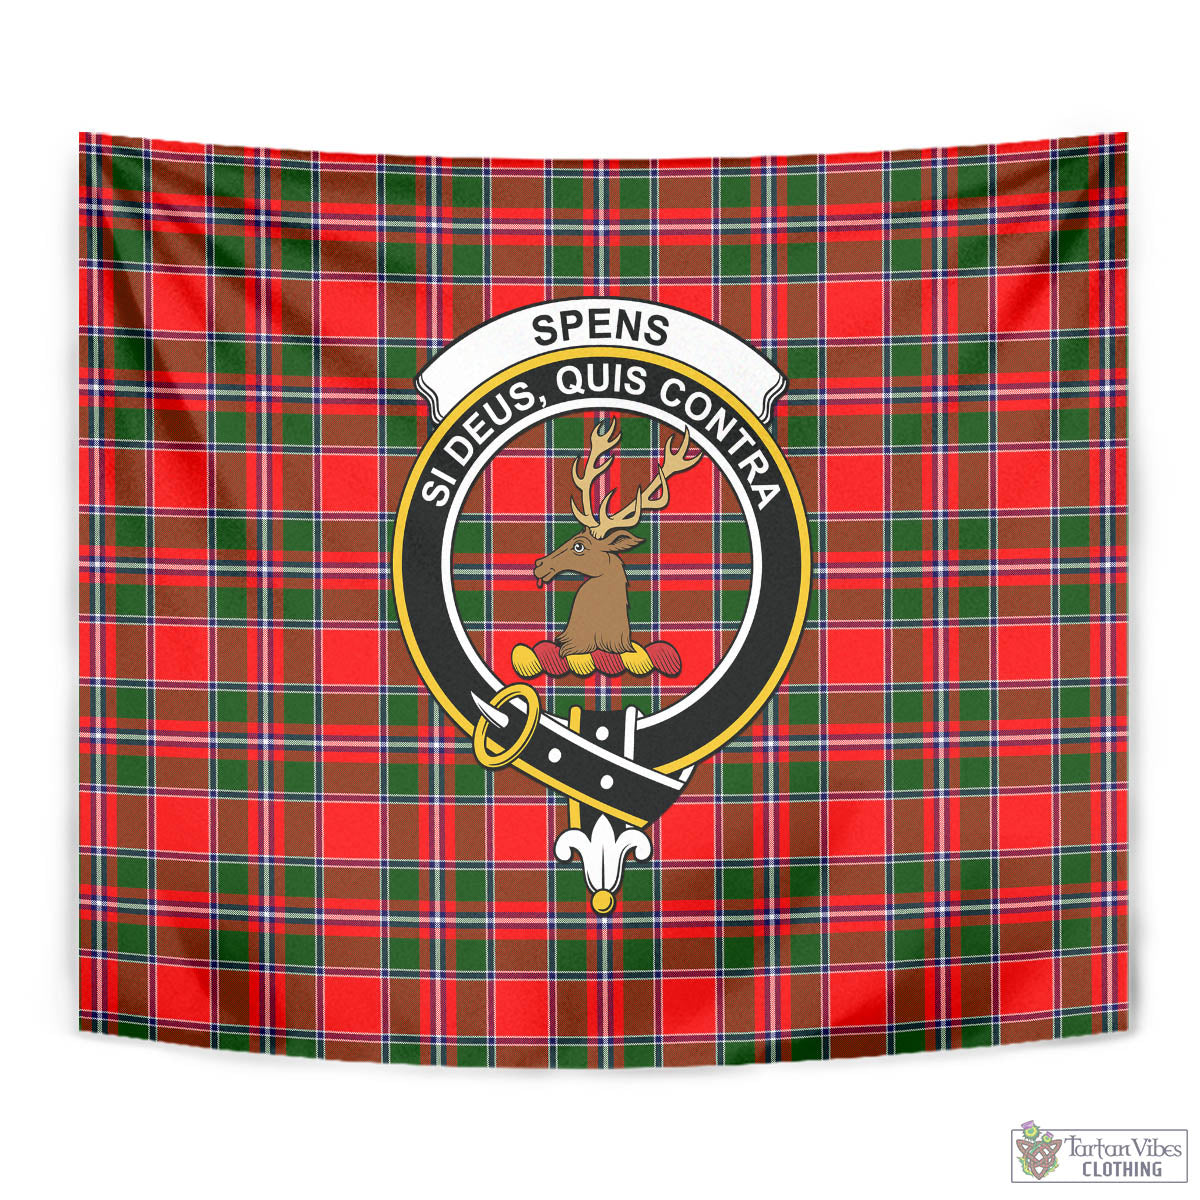 Tartan Vibes Clothing Spens Modern Tartan Tapestry Wall Hanging and Home Decor for Room with Family Crest